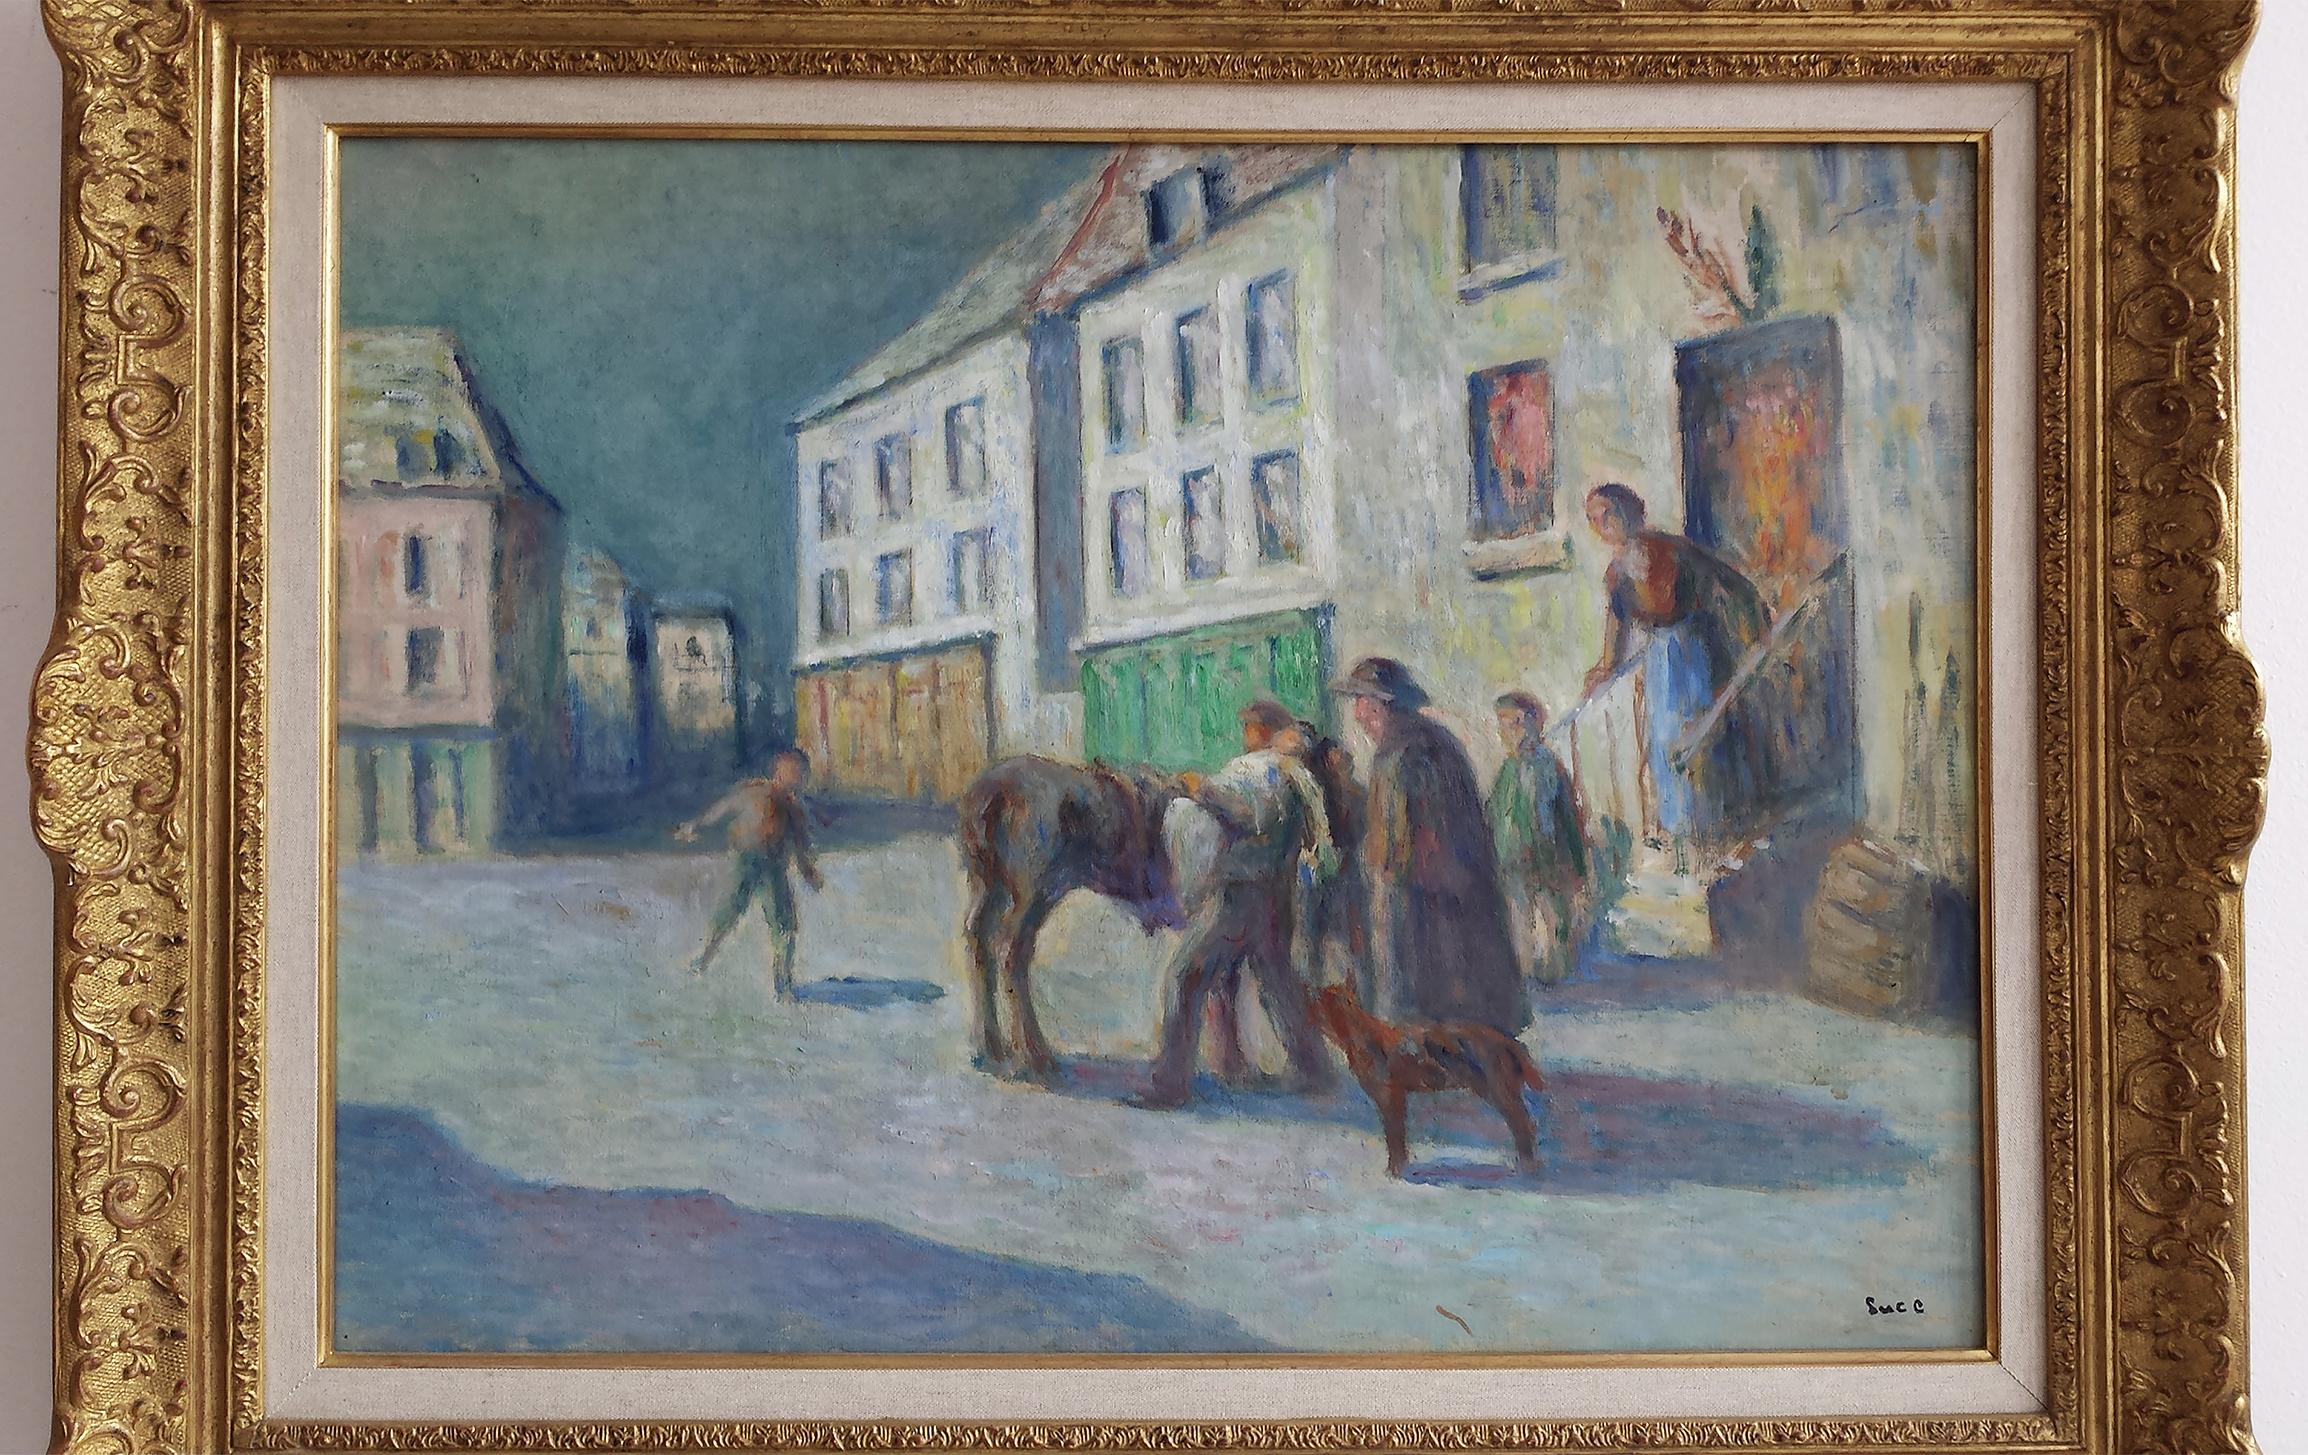 Le Depart - Man Gets off Horse  - Painting by Maximilien Luce